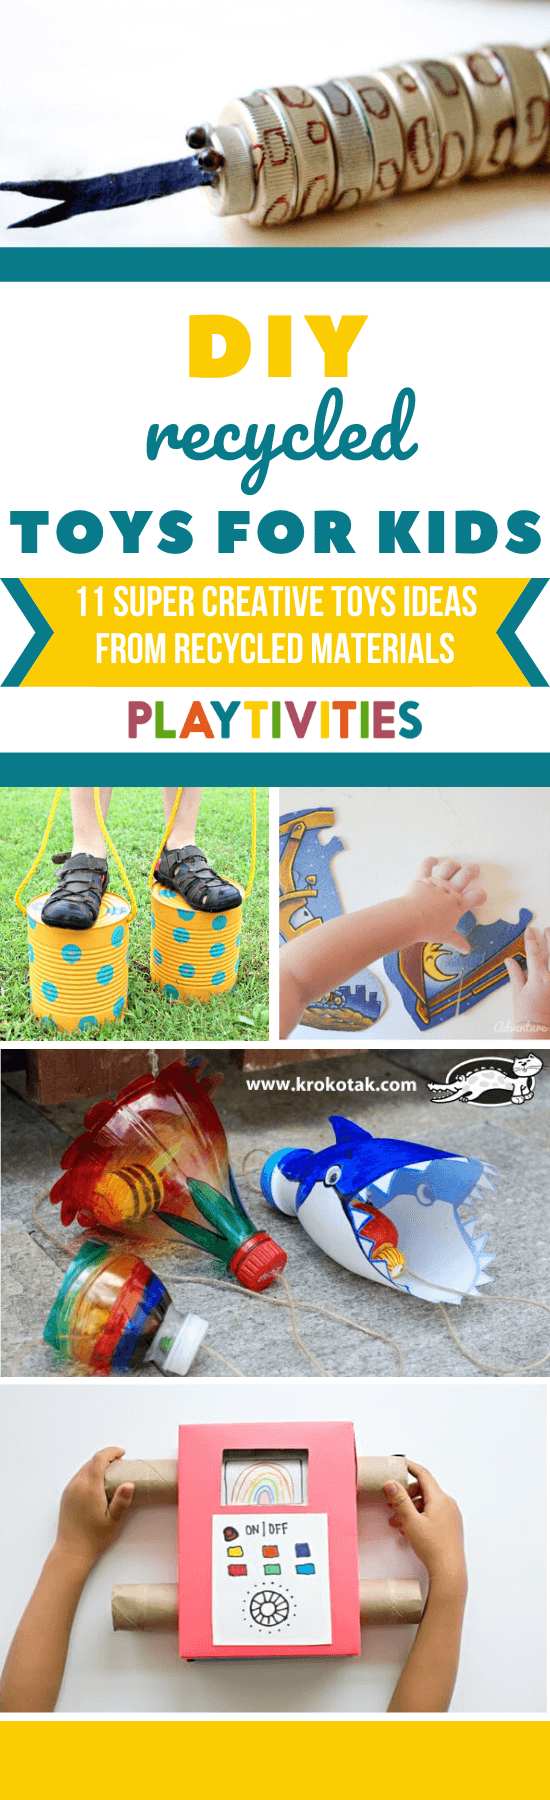 DIY Recycled Toys